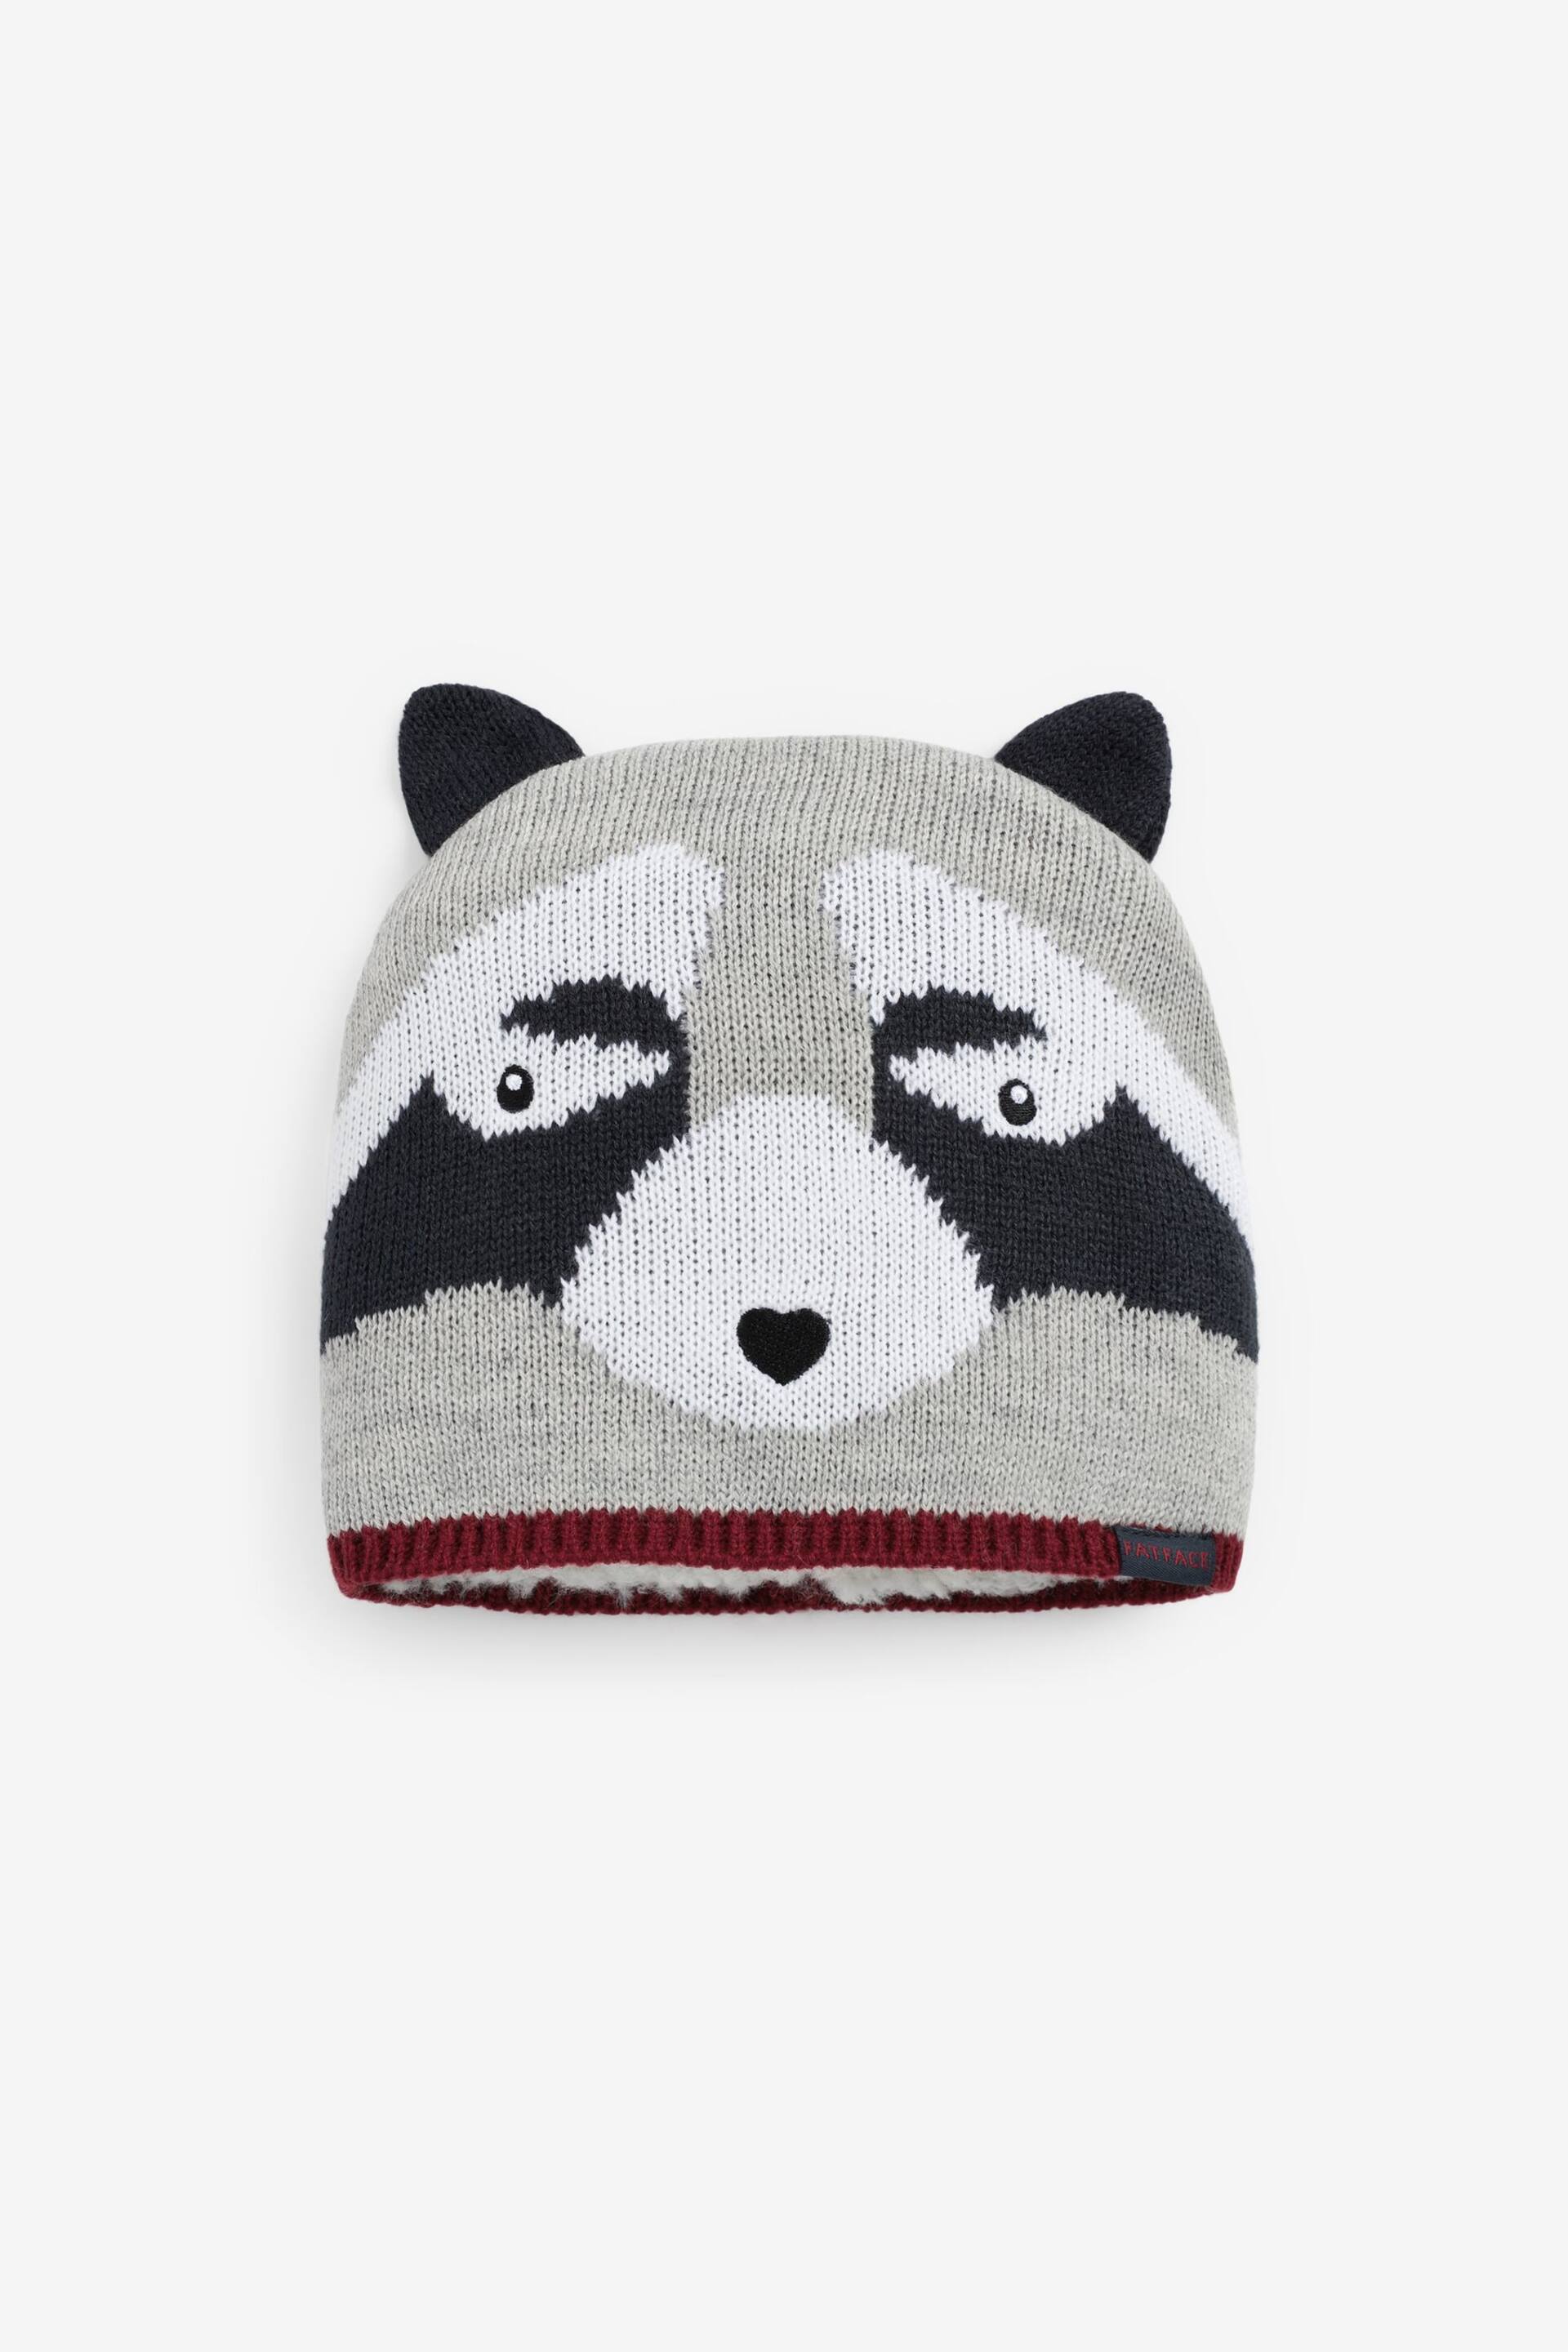 FatFace Grey Ronnie Raccoon Beanie Hat - Image 1 of 1